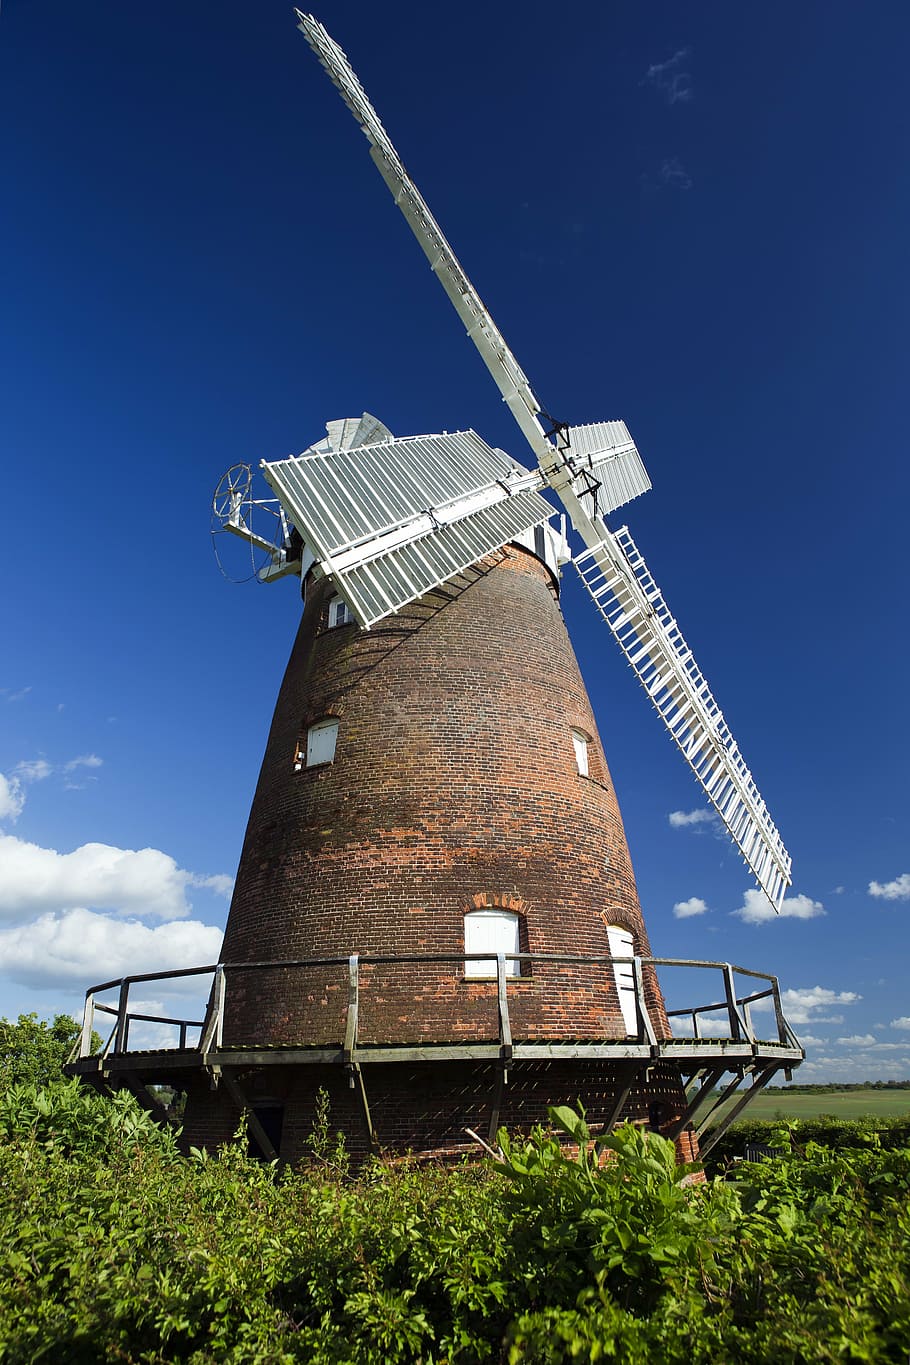 thaxted, essex, england, restored windmill, constructed 1804, white sails, red brick, timber gallery, blue sky, windmill